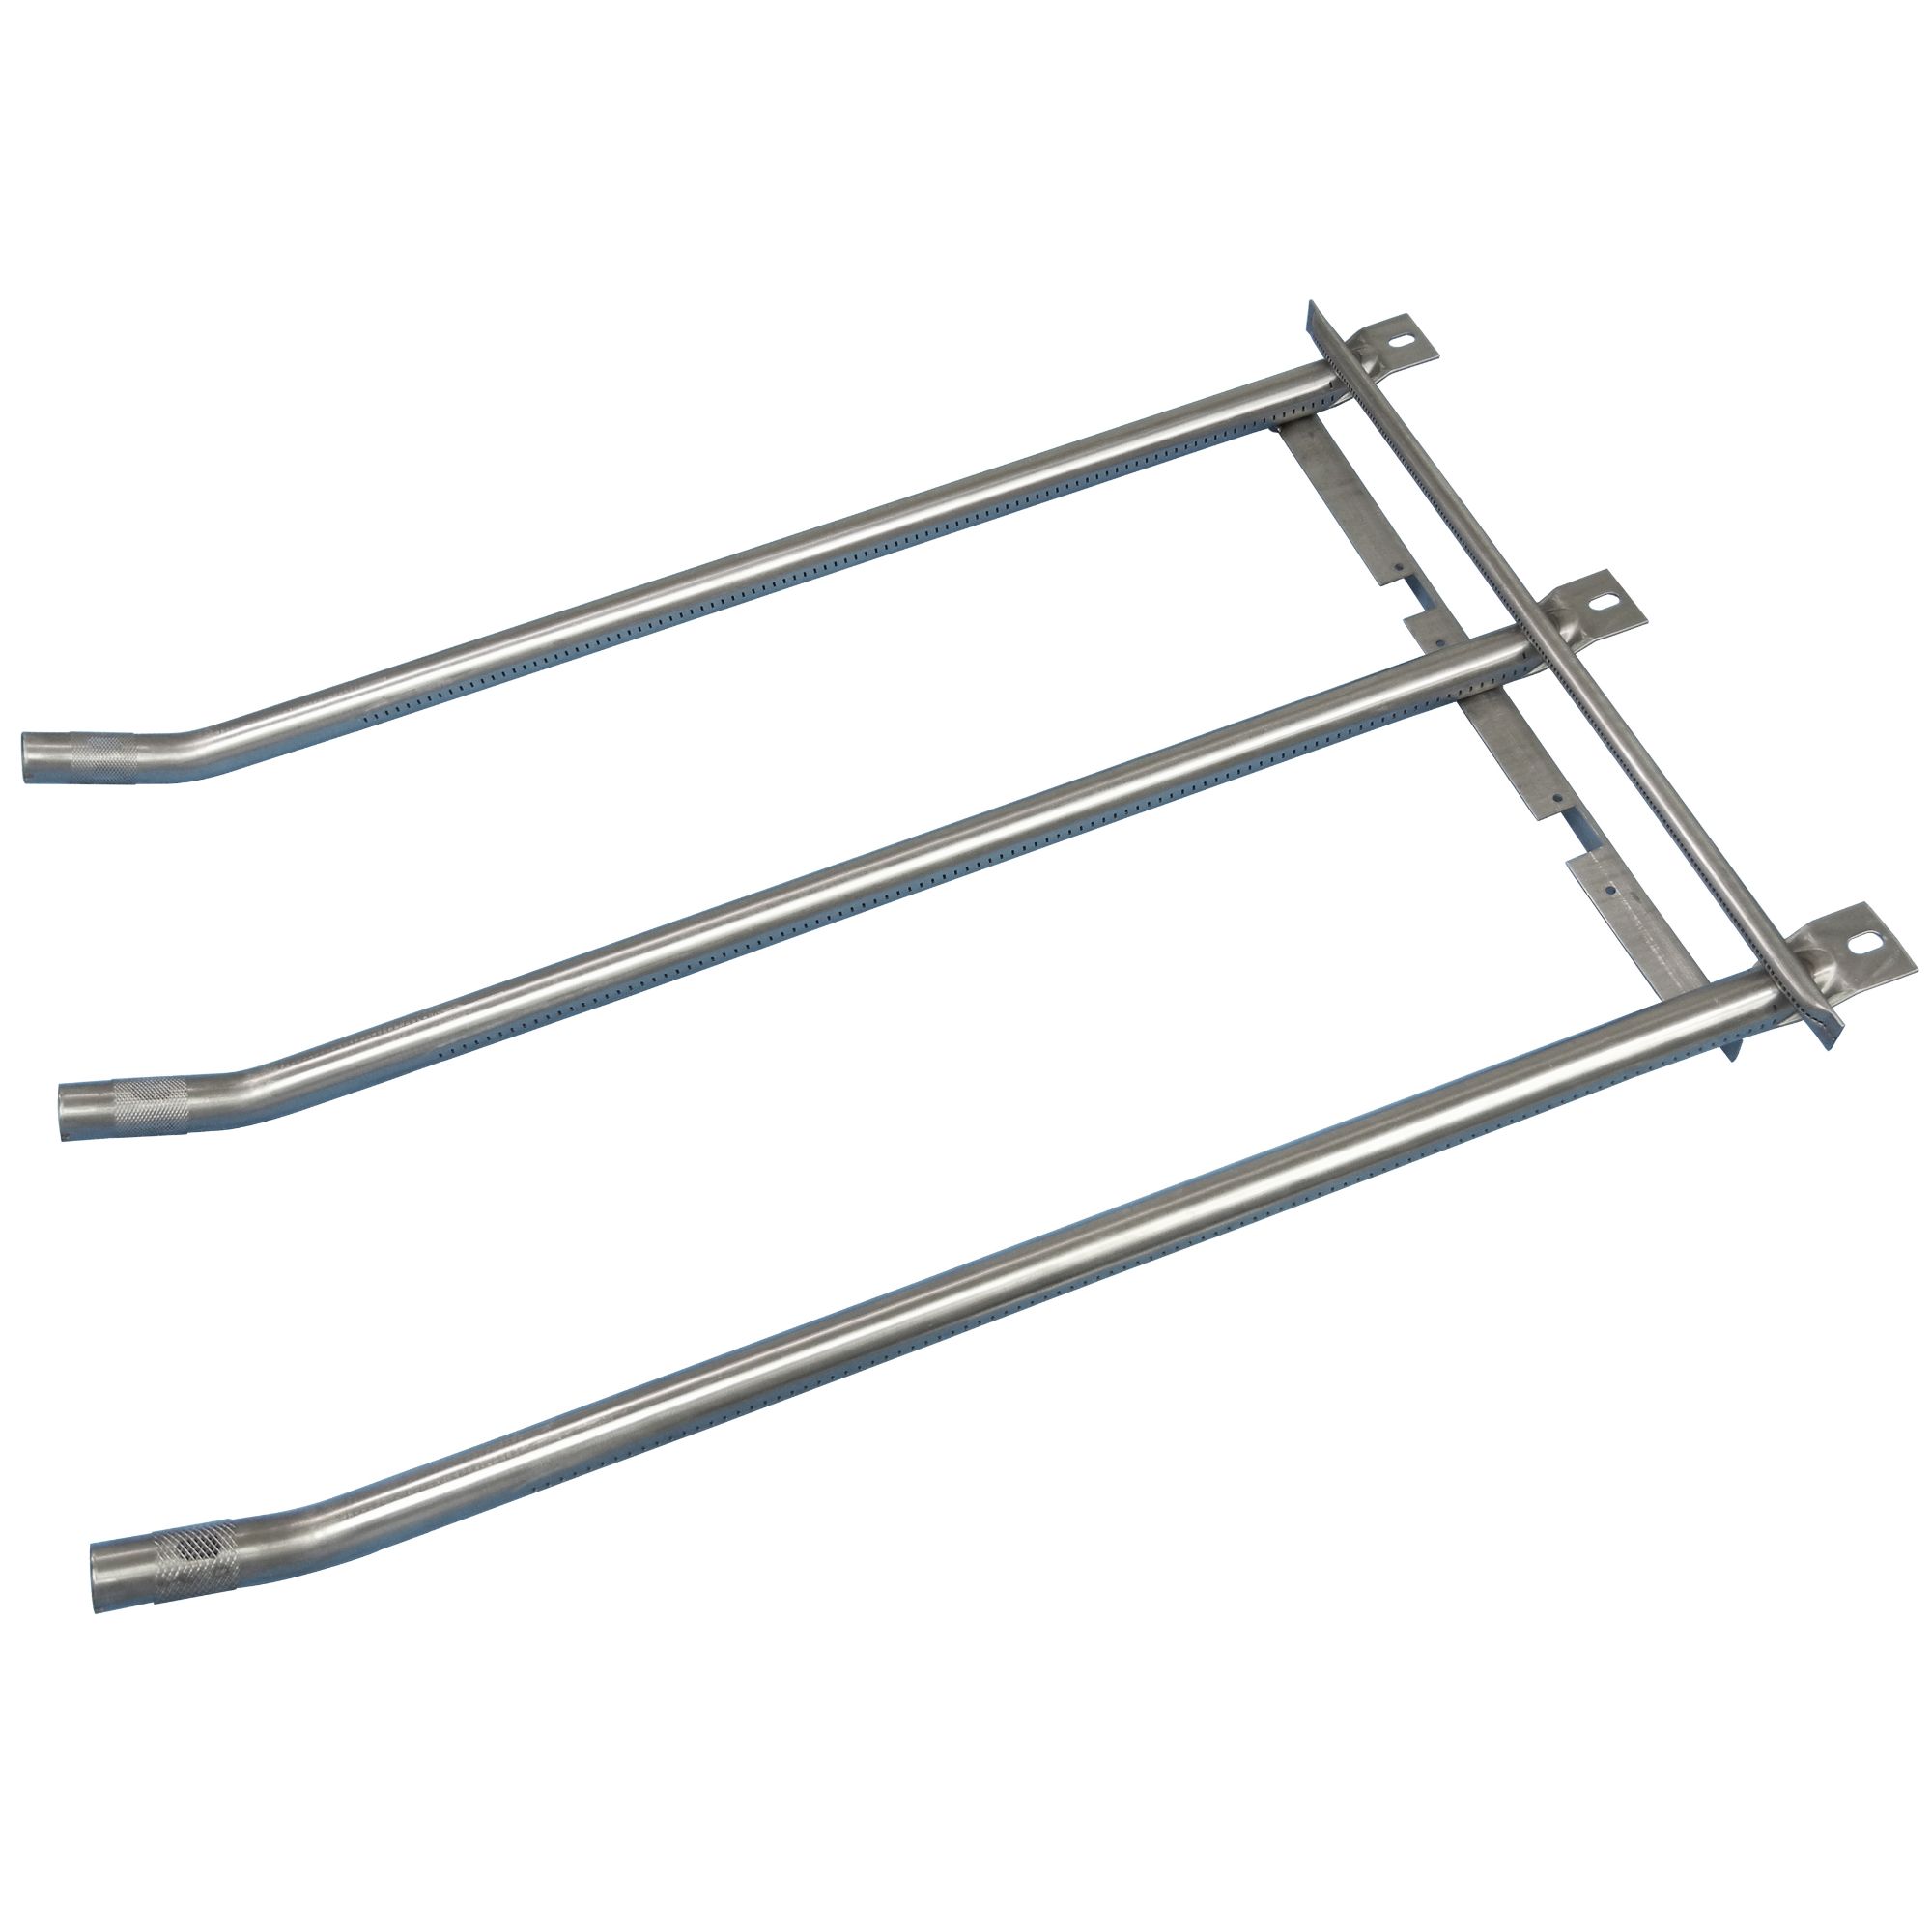 Stainless steel burner for Altima brand gas grills